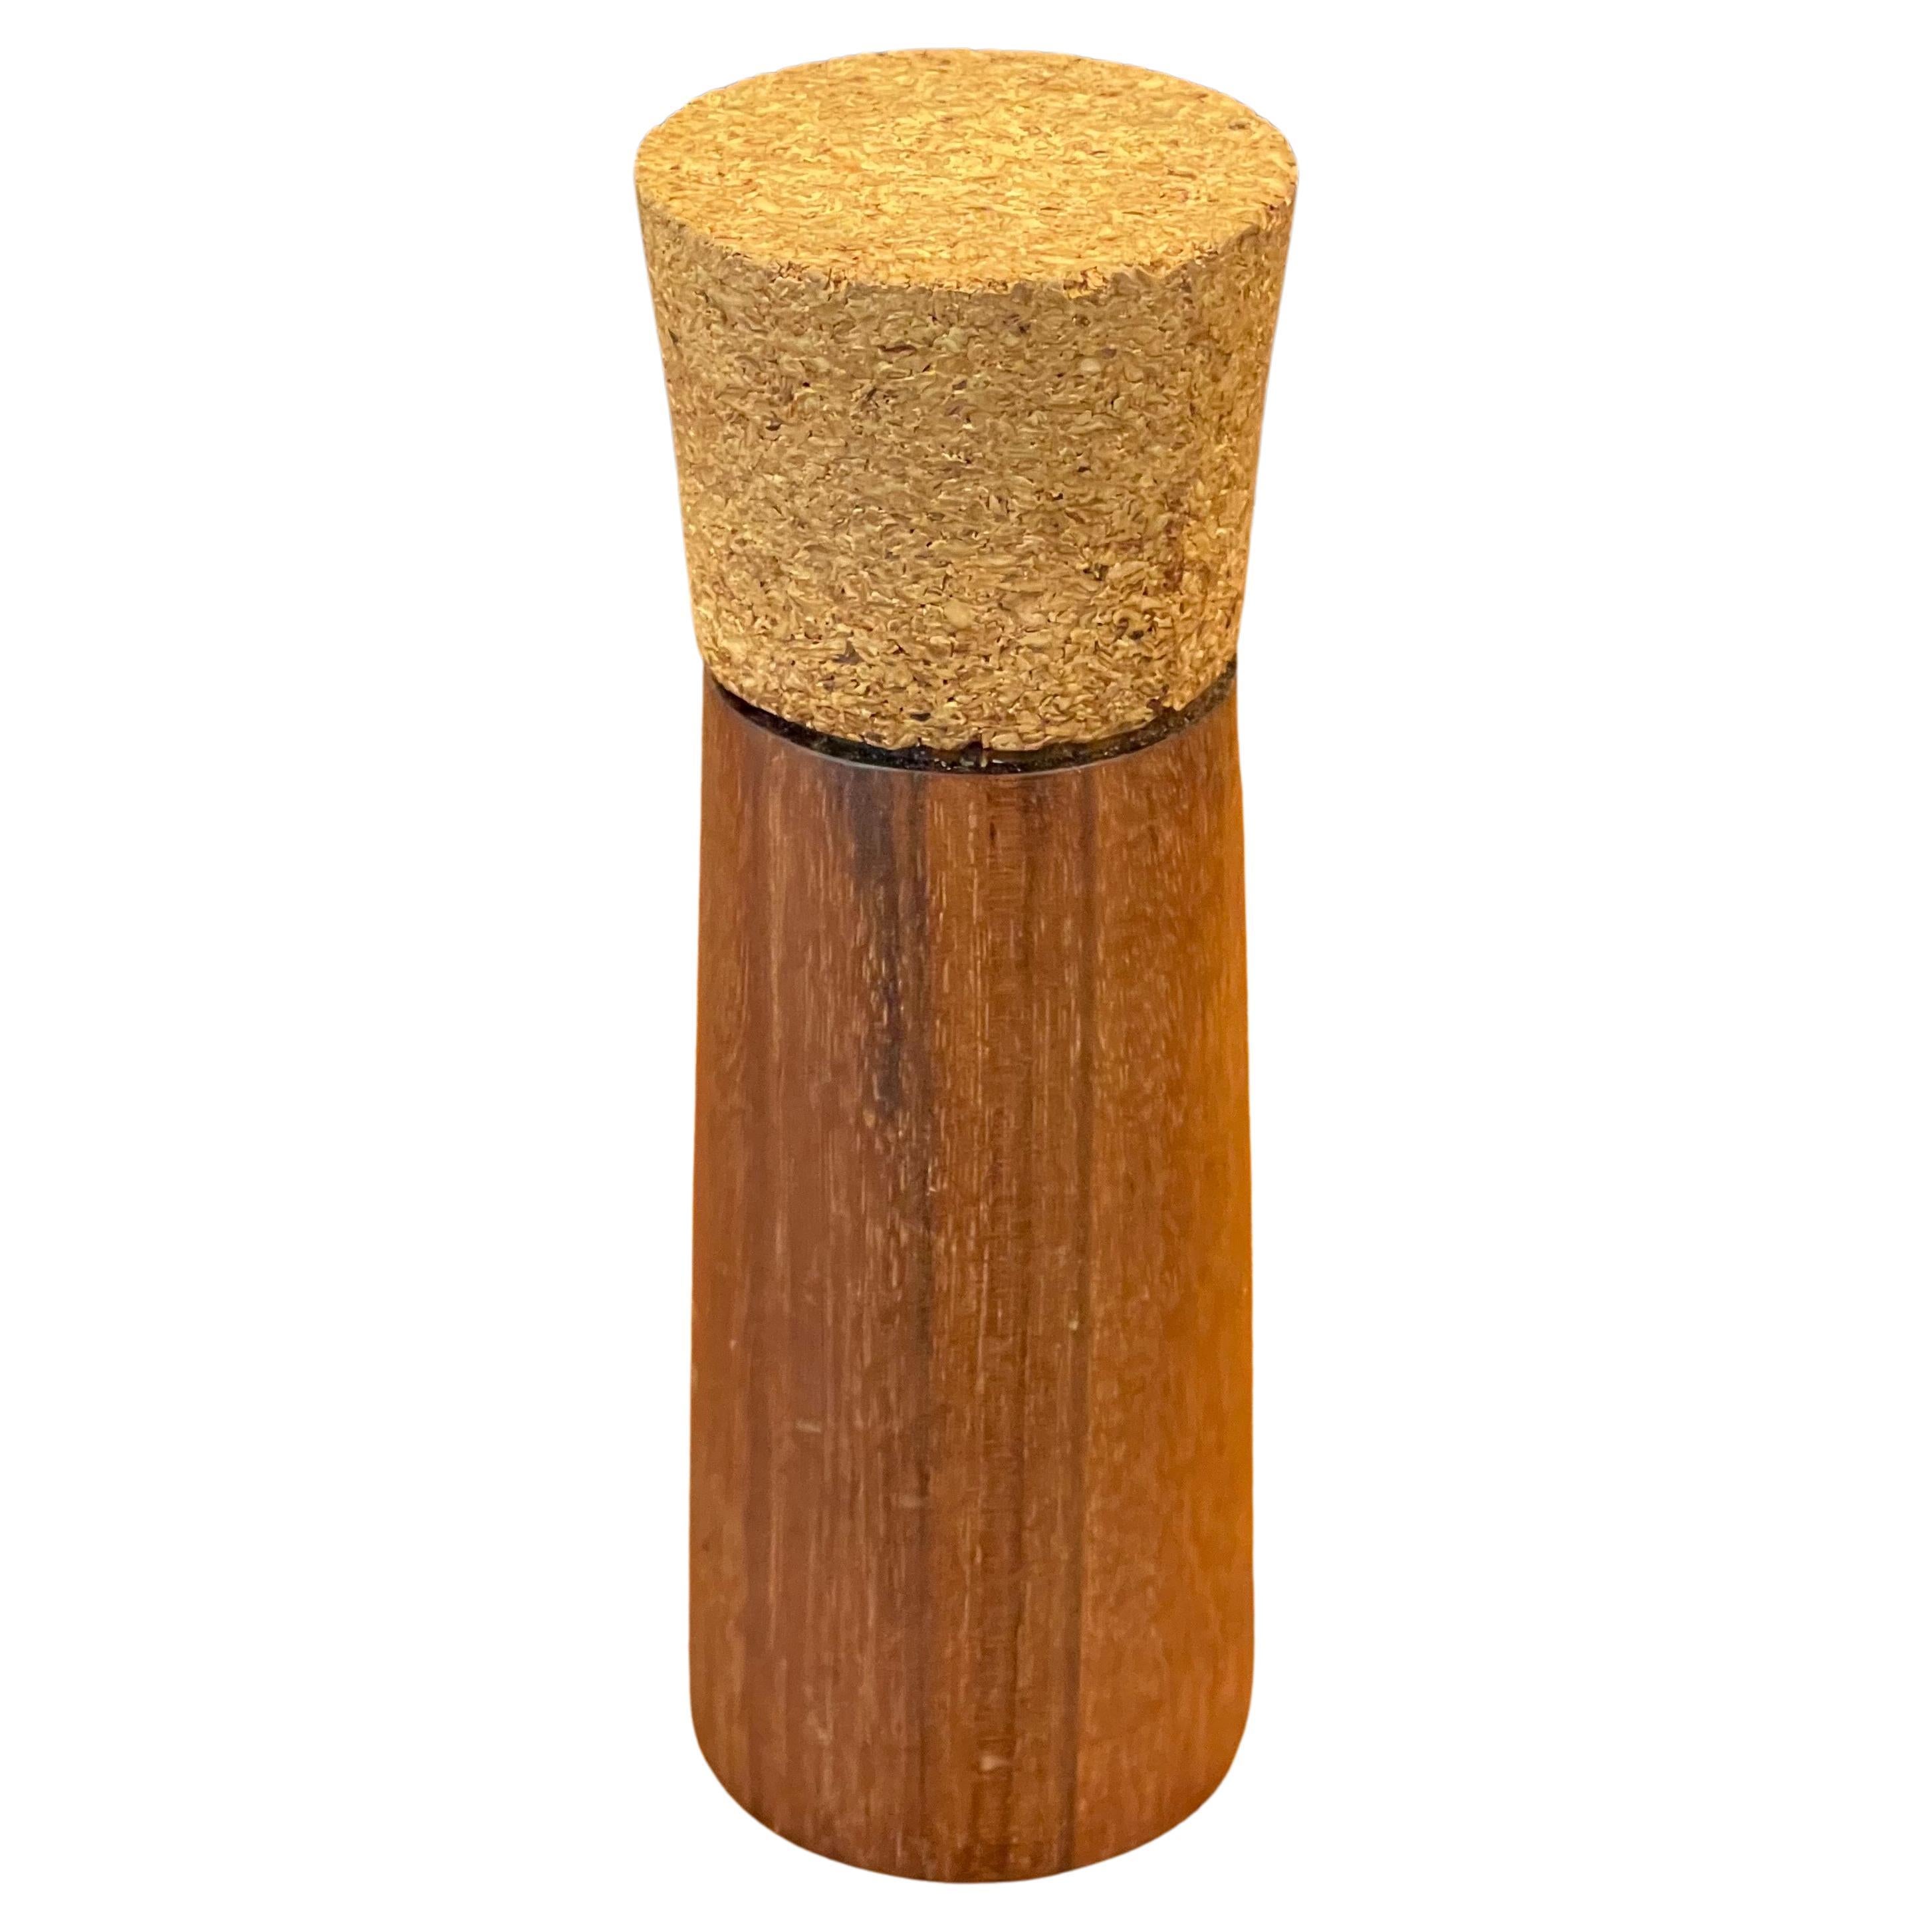 A unique MCM teak and cork peppermill, circa 1970s. The piece is in very good vintage condition and measures 2.5